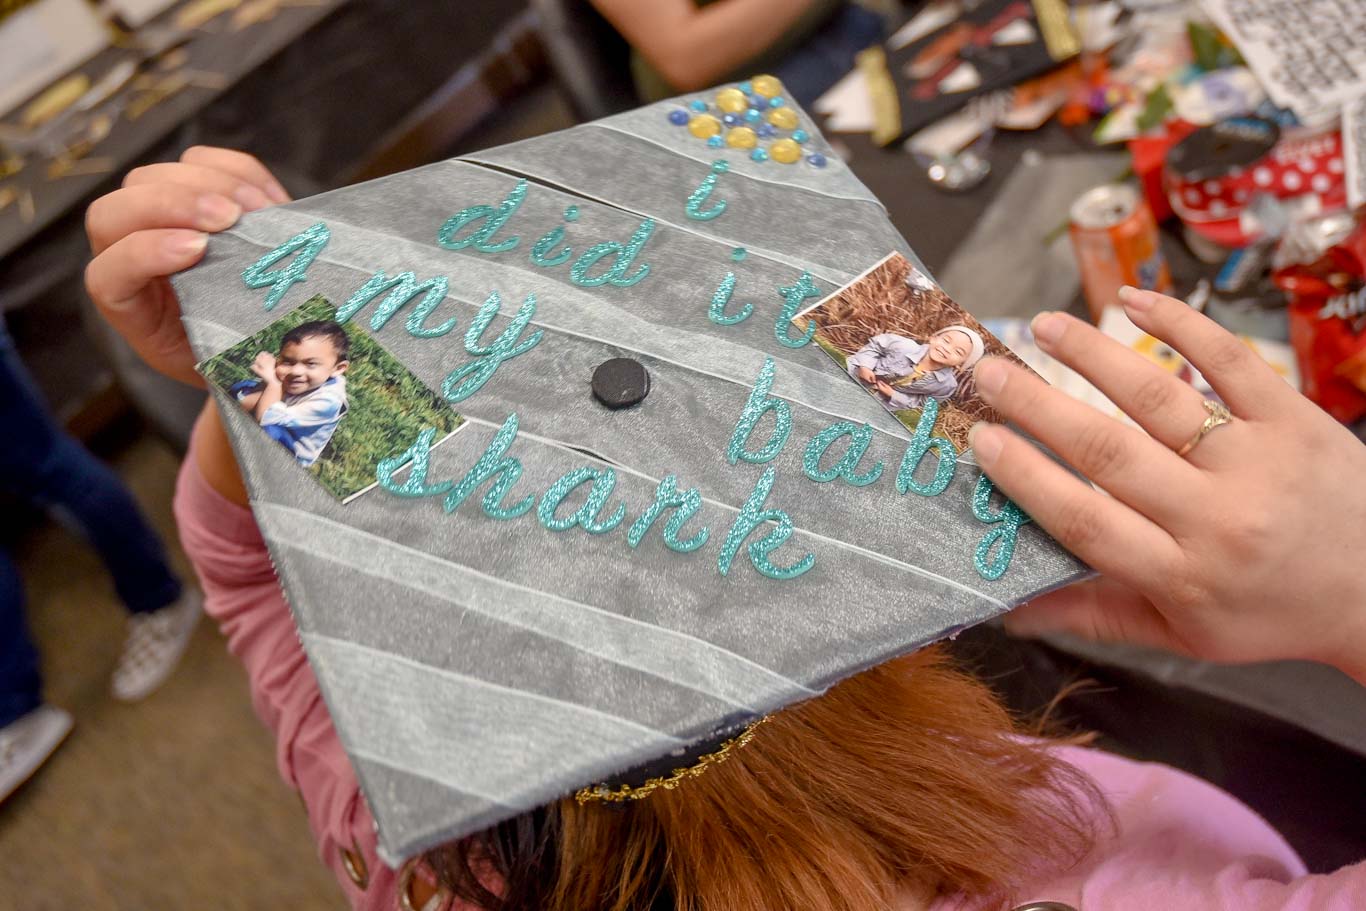 Sesilie Miranda's commencement cap honors her son Haven, who is a big "Baby Shark" fan. Sesilie will graduate from San Joaquin Delta College with an accounting degree.